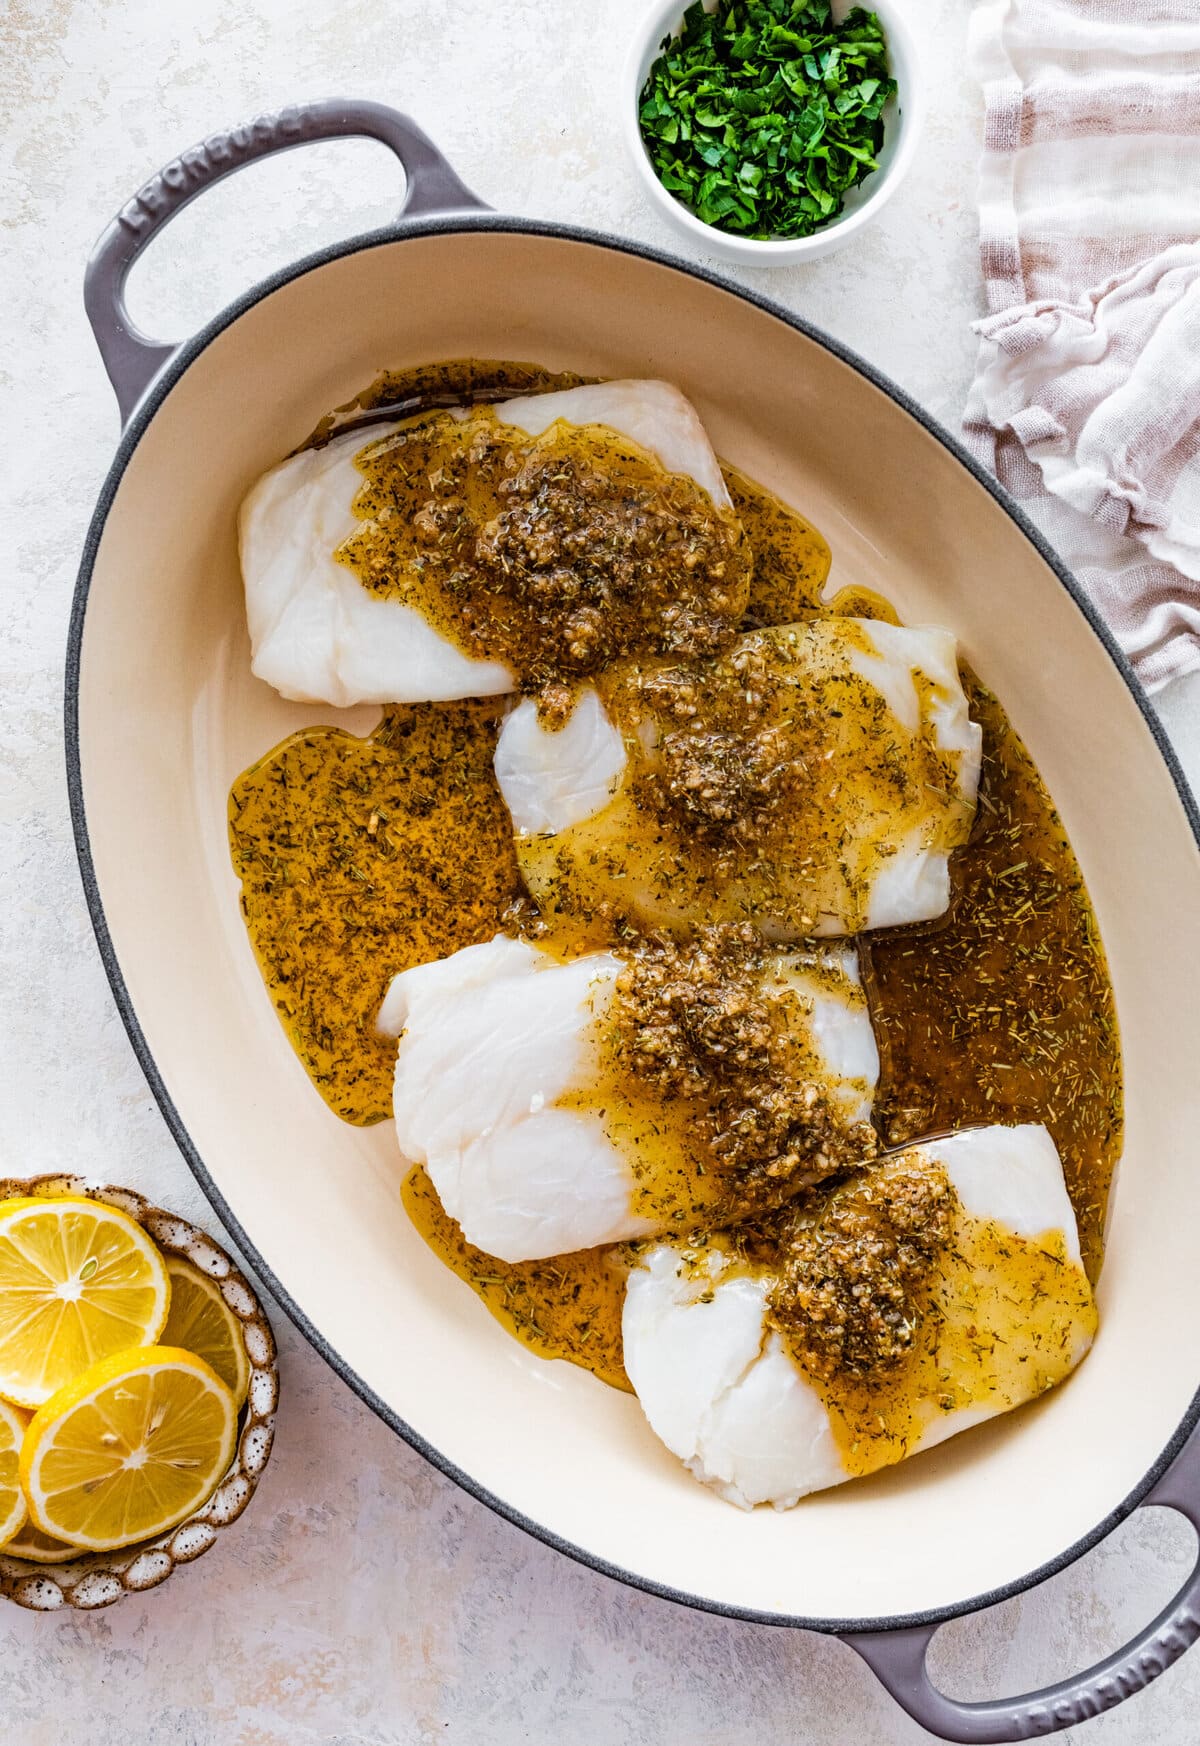 How to make easy oven baked cod step-by-step instructions: pour the marinade over the cod.